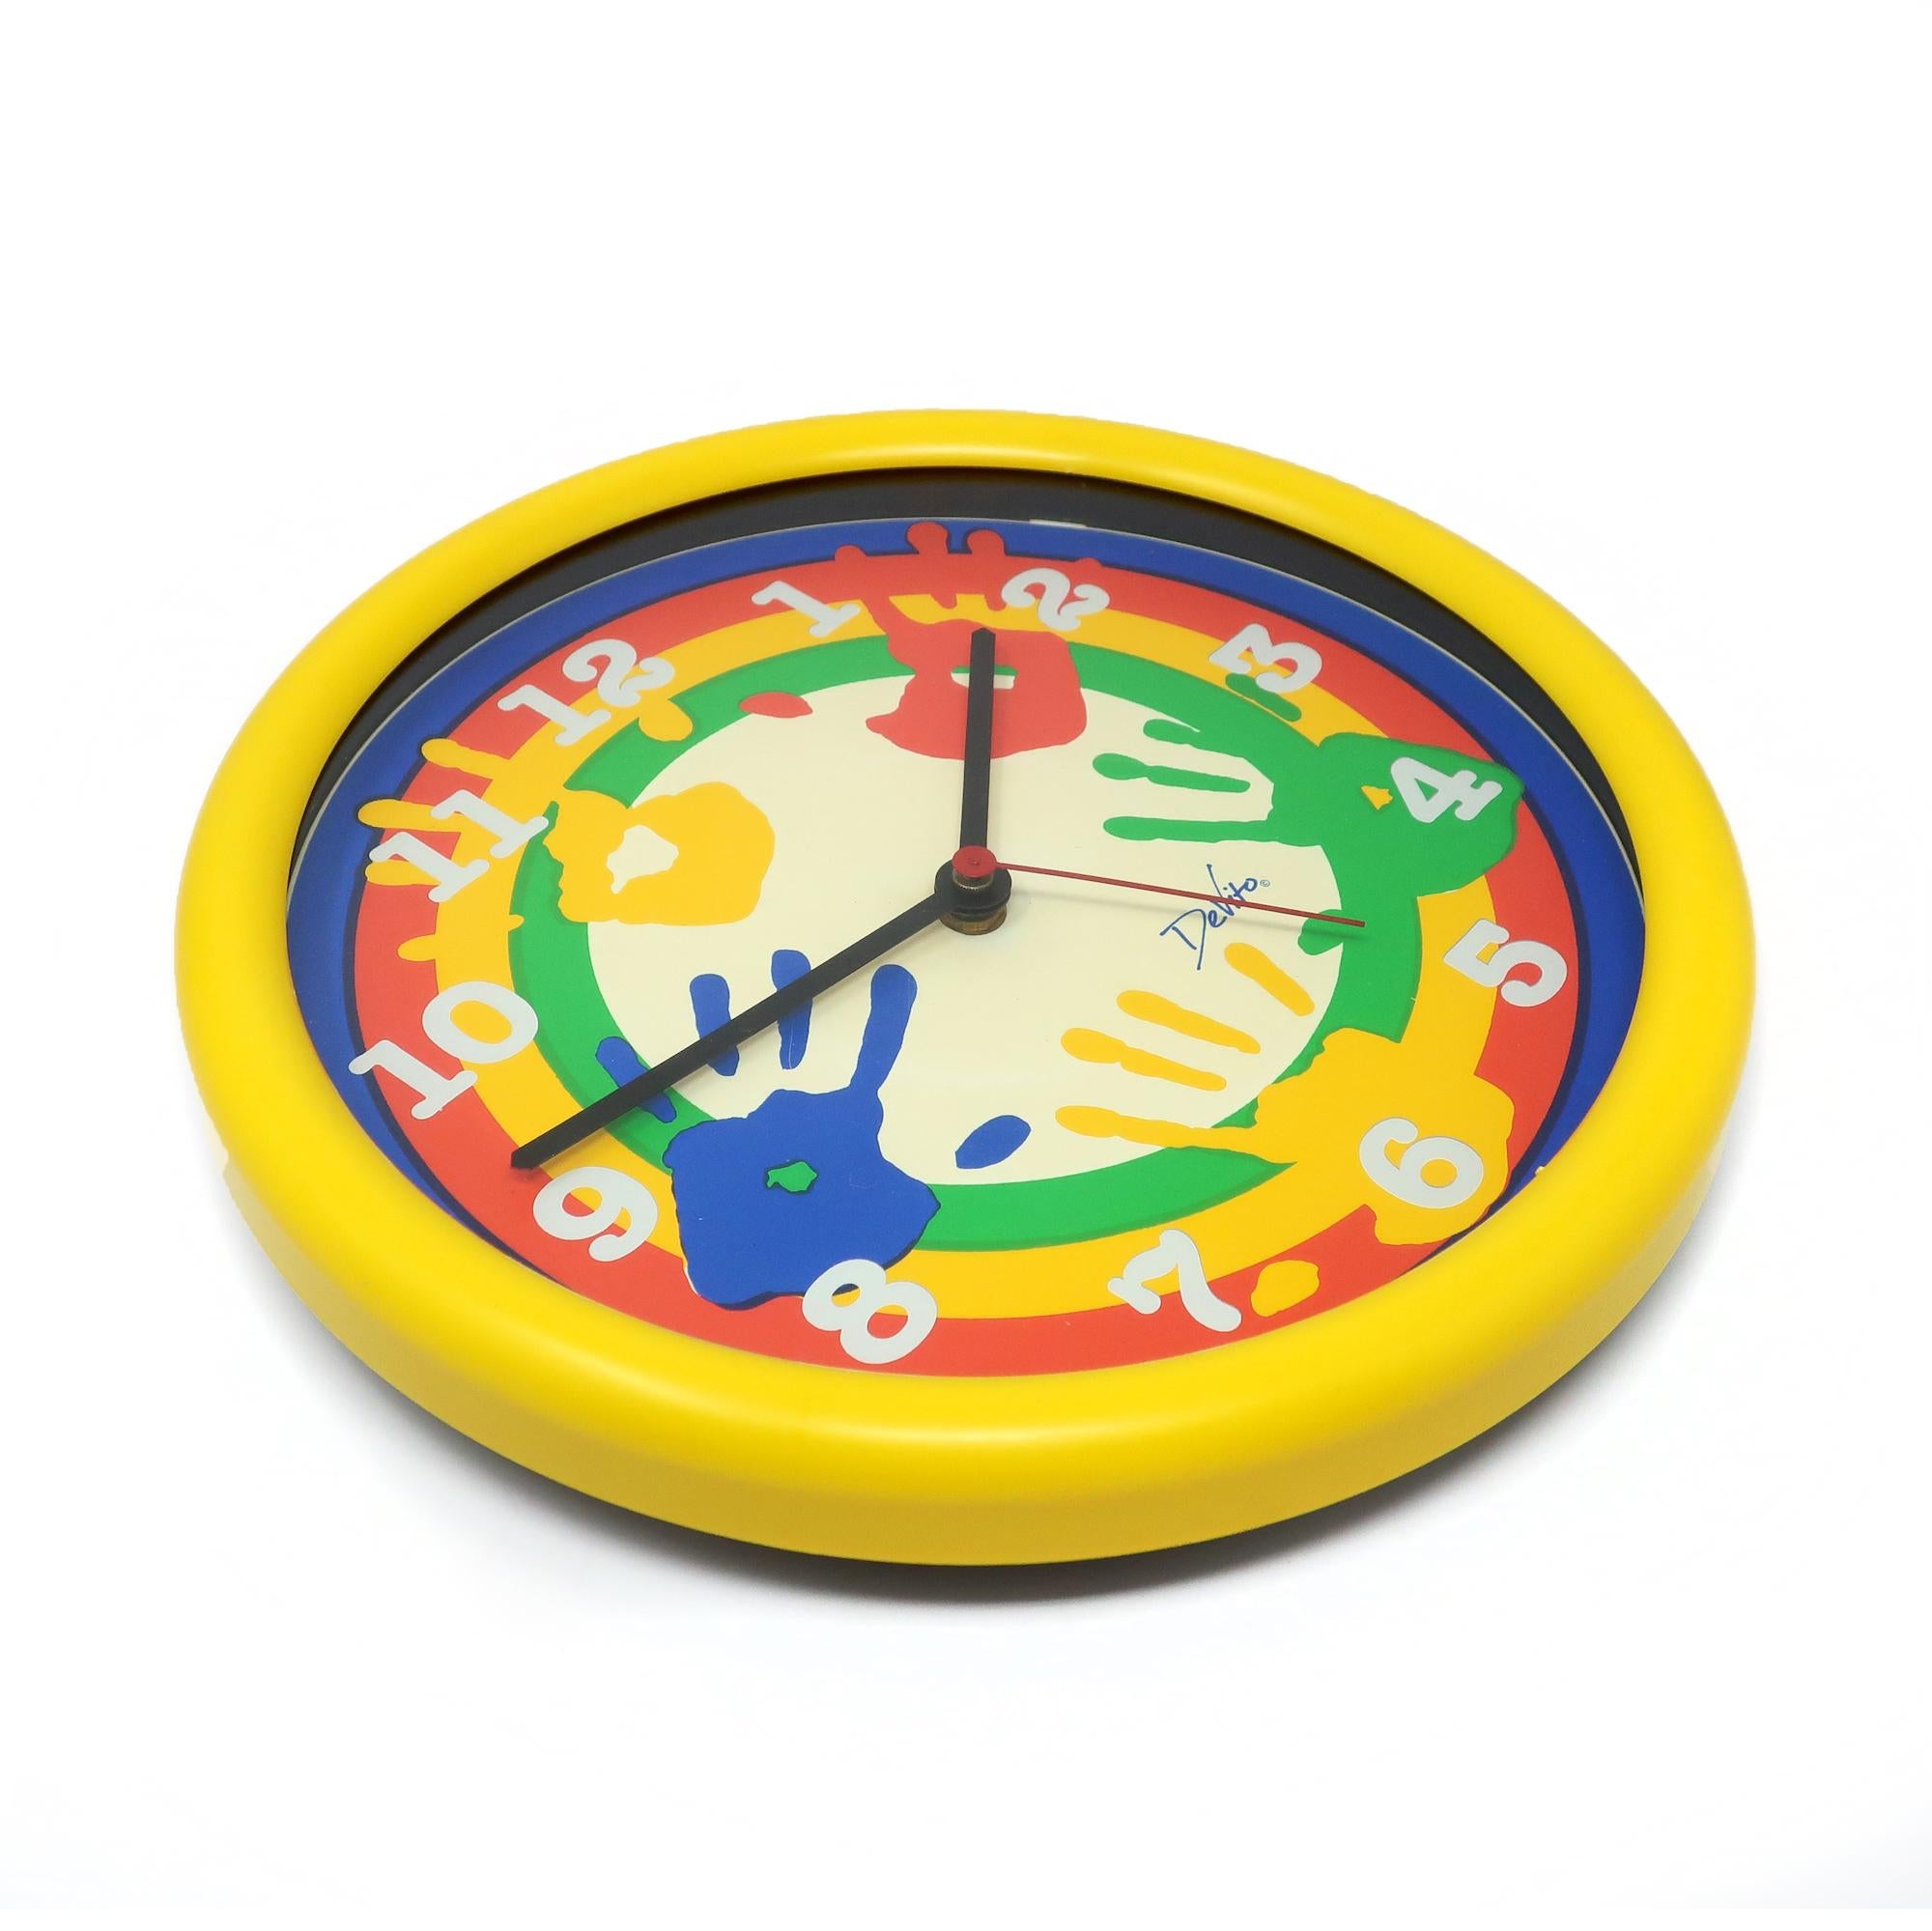 Post-Modern 1980s Colorful Handprint Wall Clock by Devito For Sale